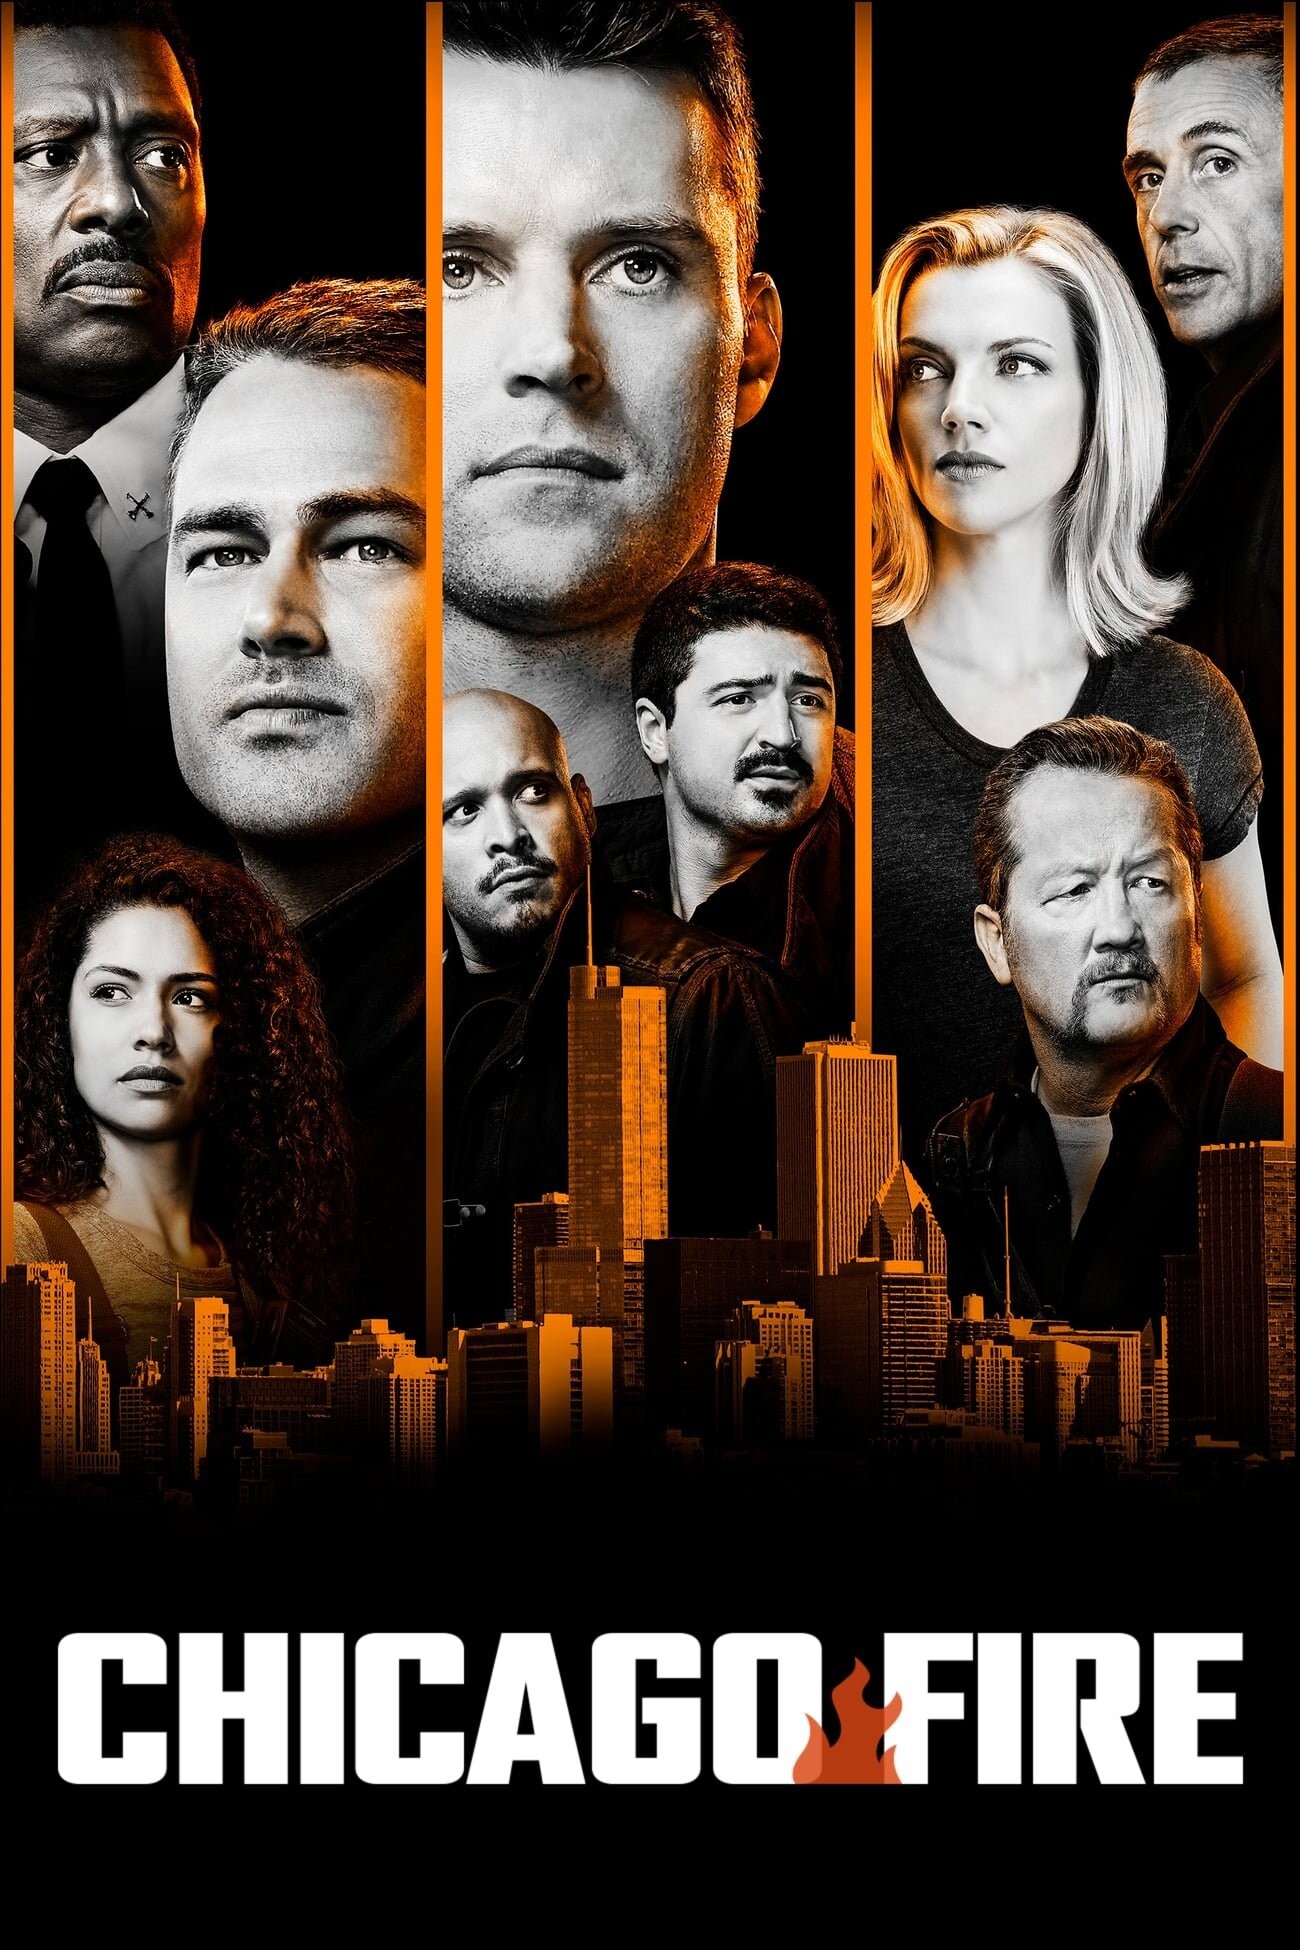 Chicago Fire (TV Series): Emergency TV show, Action packed, Likeable characters, Realistic scenes, A drama series. 1300x1950 HD Background.